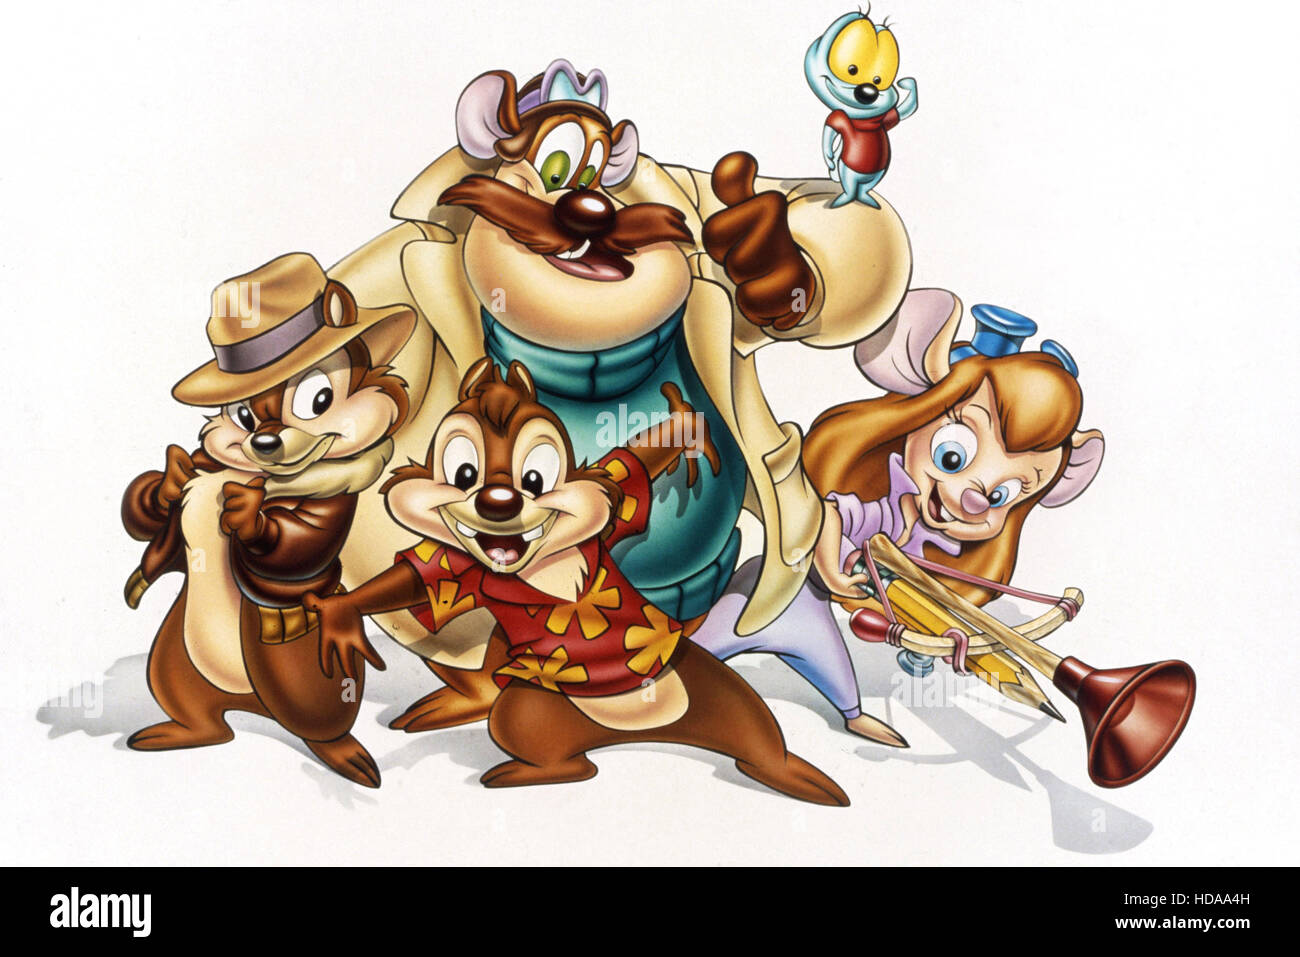 CHIP 'N' DALE'S RESCUE RANGERS, front from left: Chip, Dale, rear from left: Monterey Jack, Zipper, Gadget Hackwrench, Stock Photo